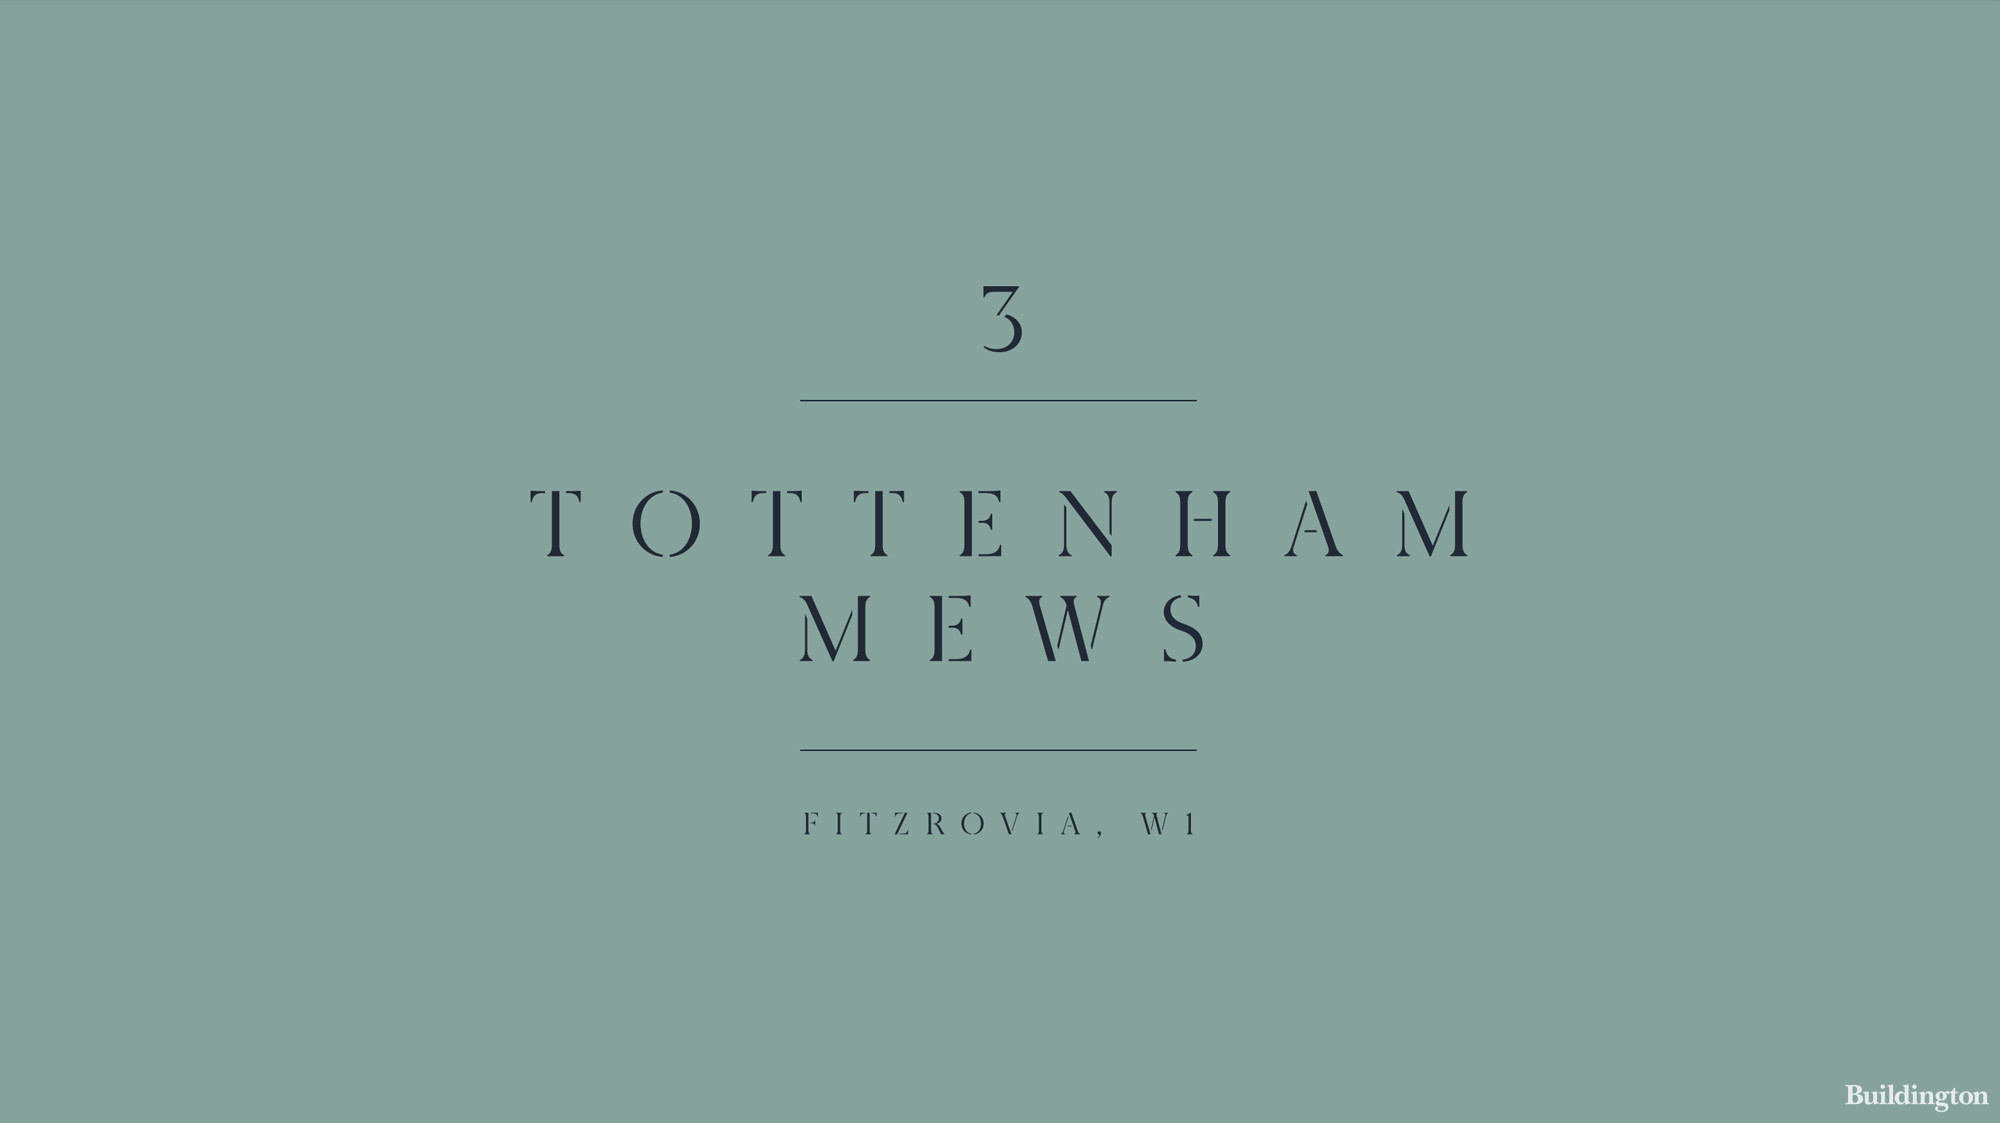 Cover with the 3 Tottenham Mews development logo